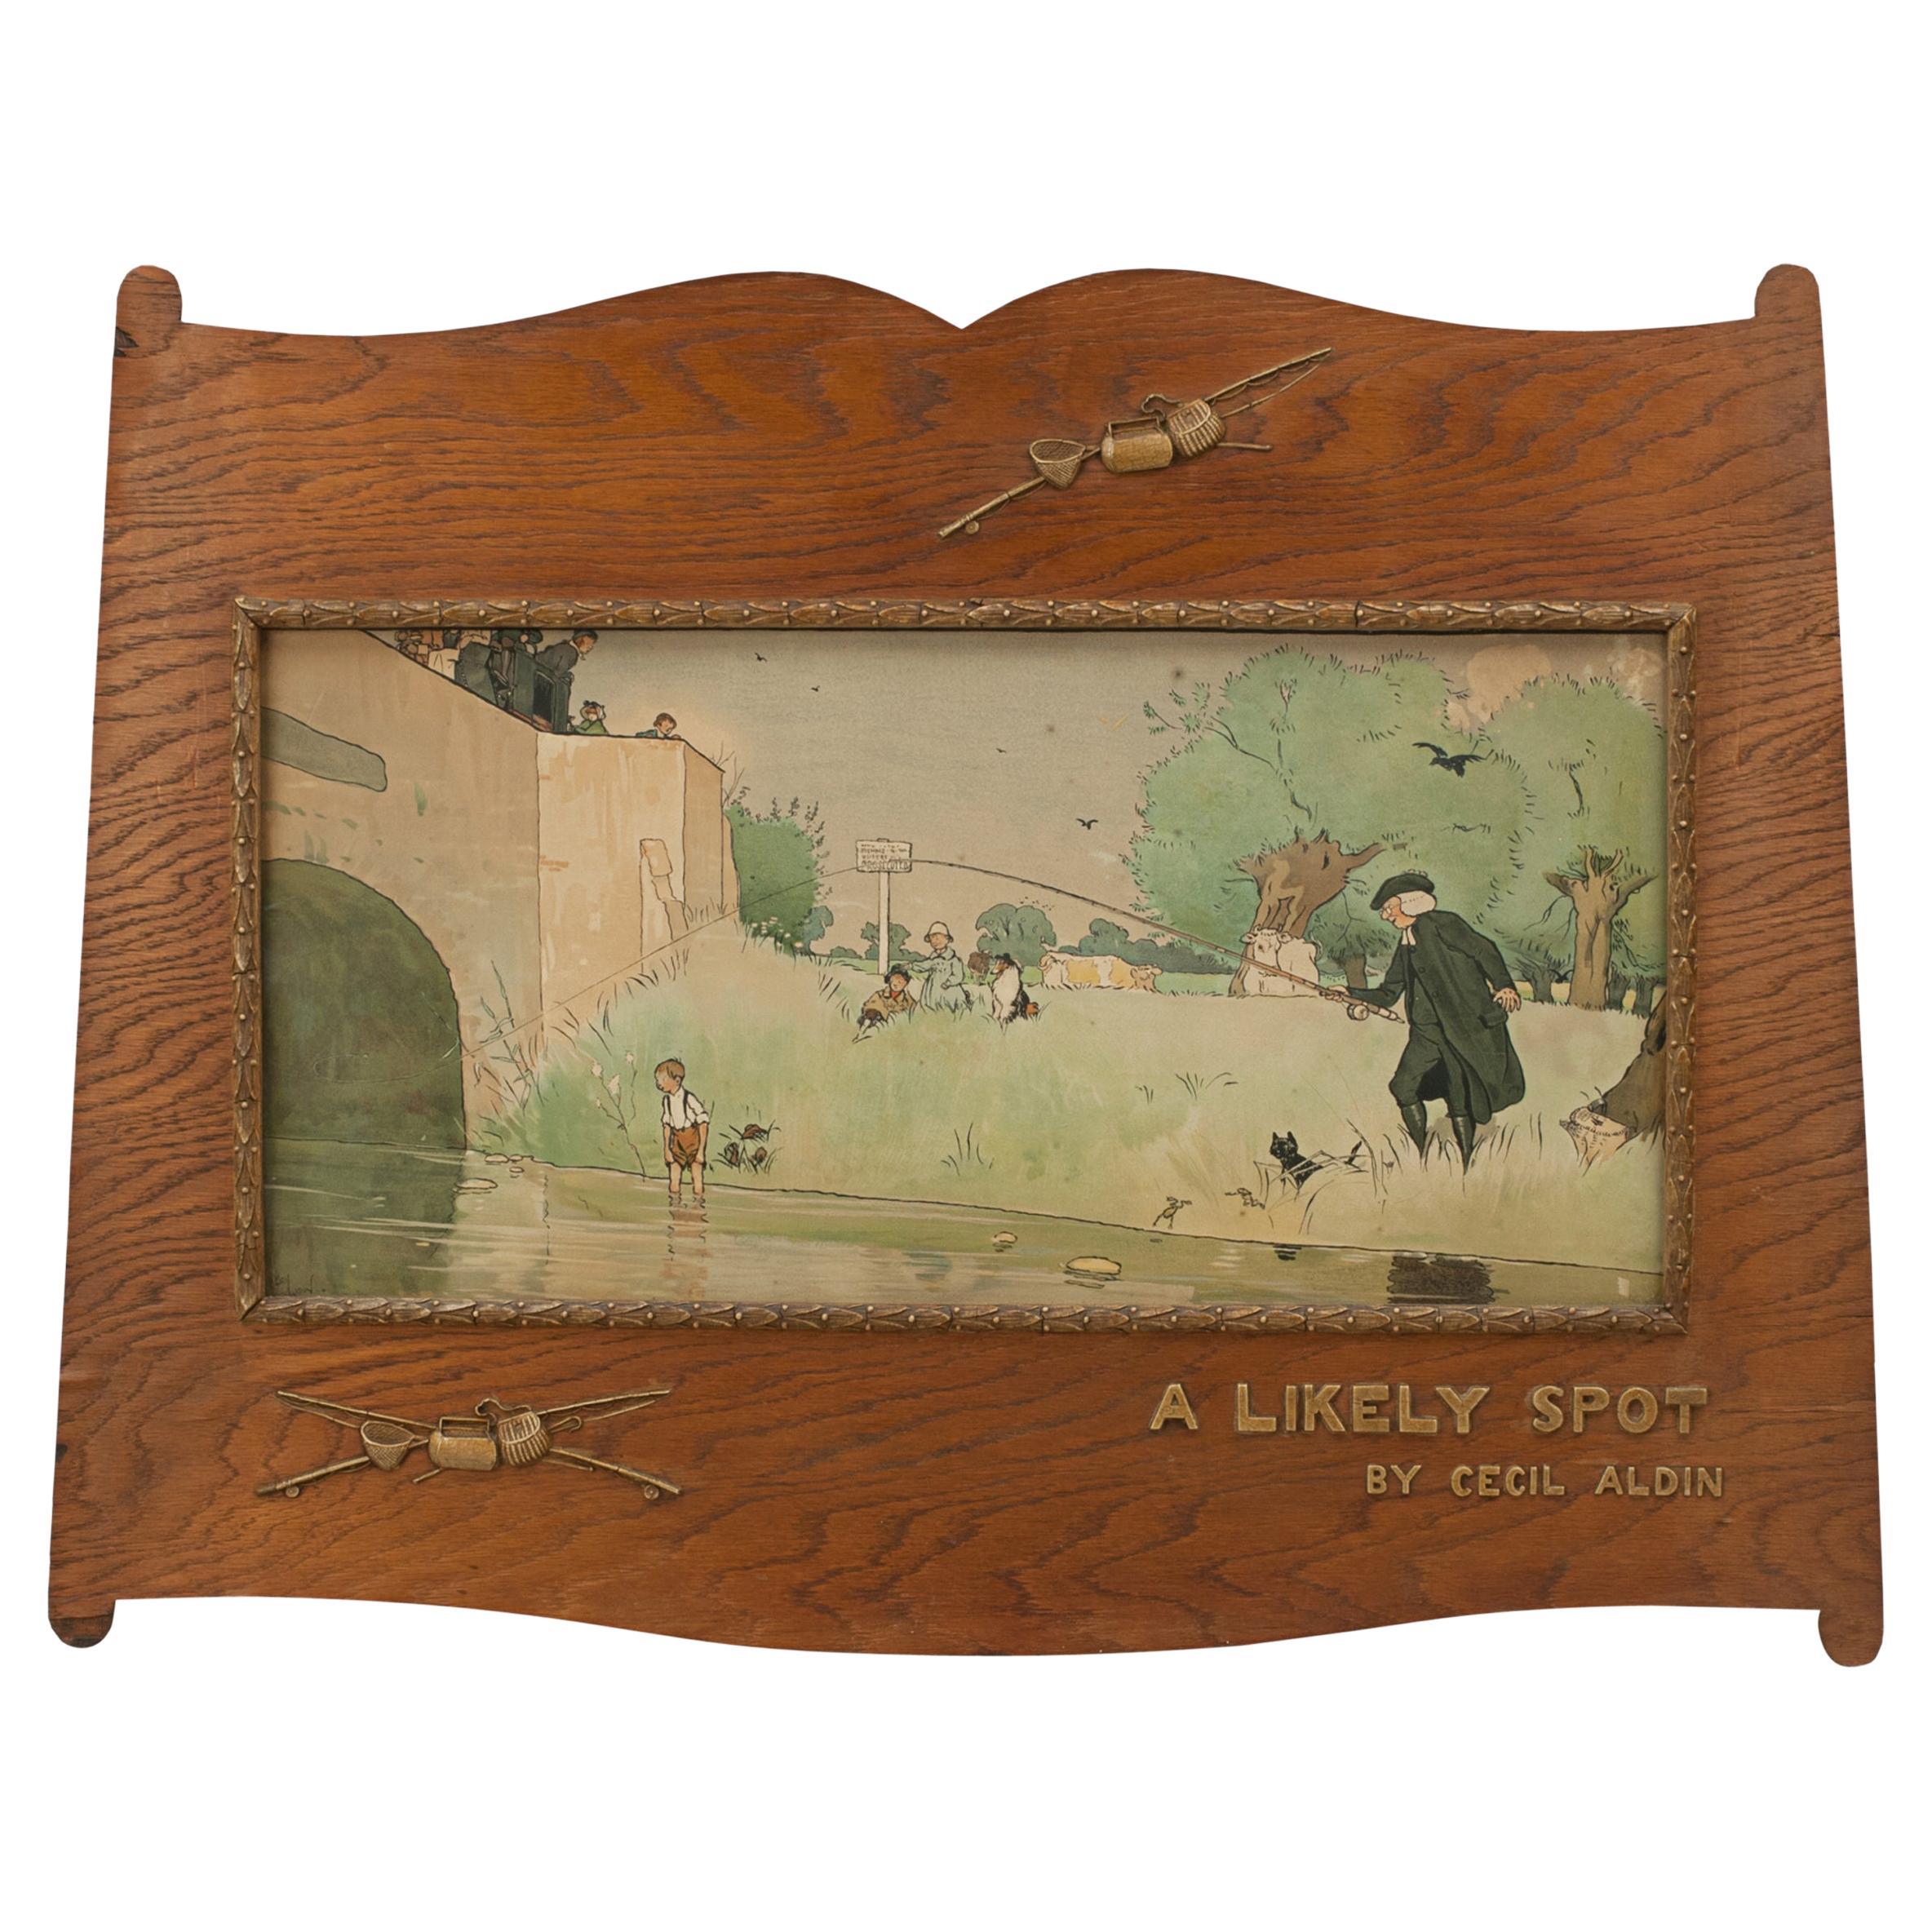 Antique Fishing Print, a Likely Spot in Original Titled Frame by Cecil Aldin